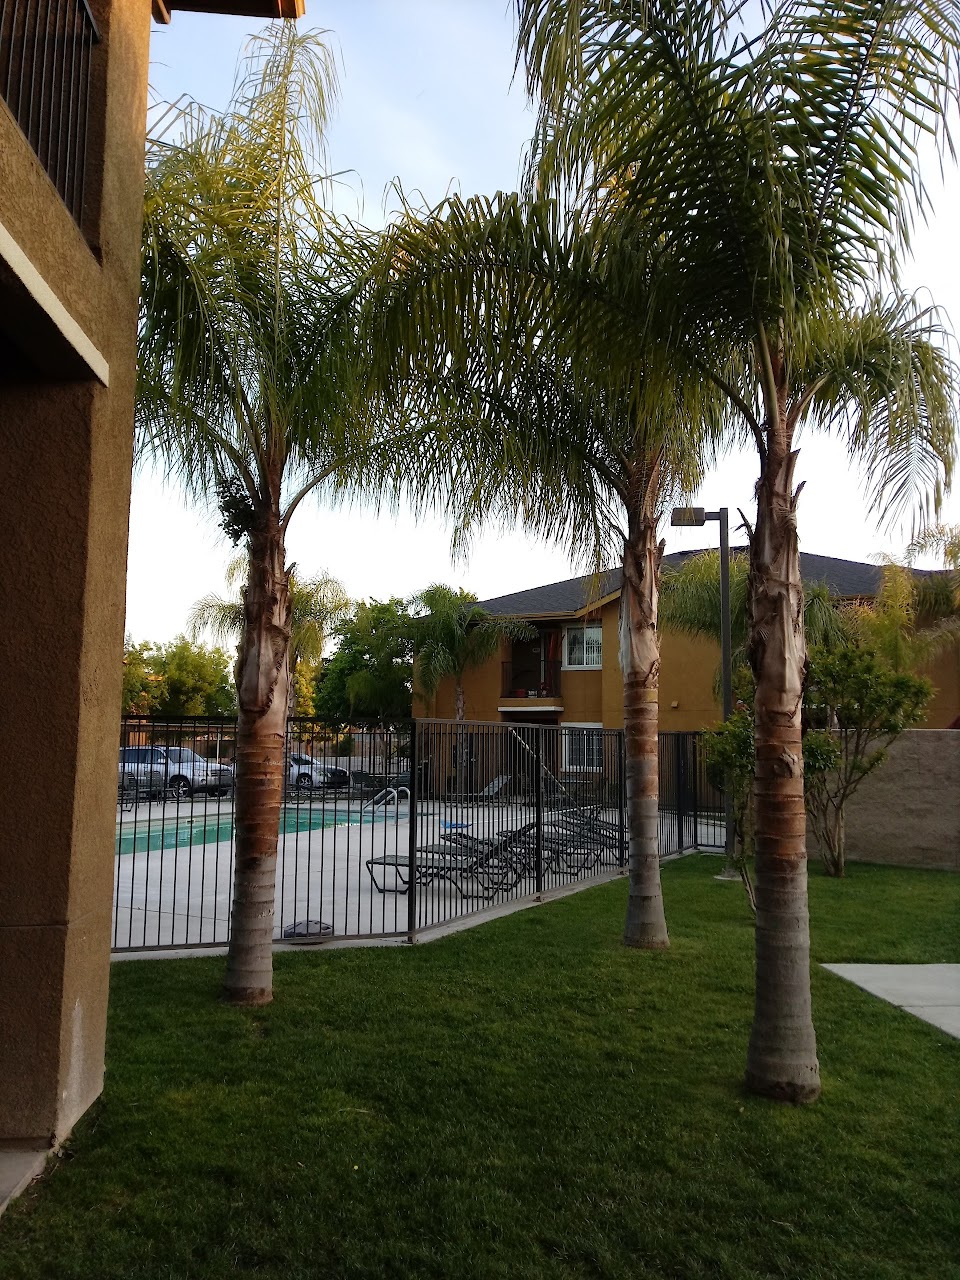 Photo of THE VILLAGE AT CHOWCHILLA. Affordable housing located at 297 MYER DR CHOWCHILLA, CA 93610